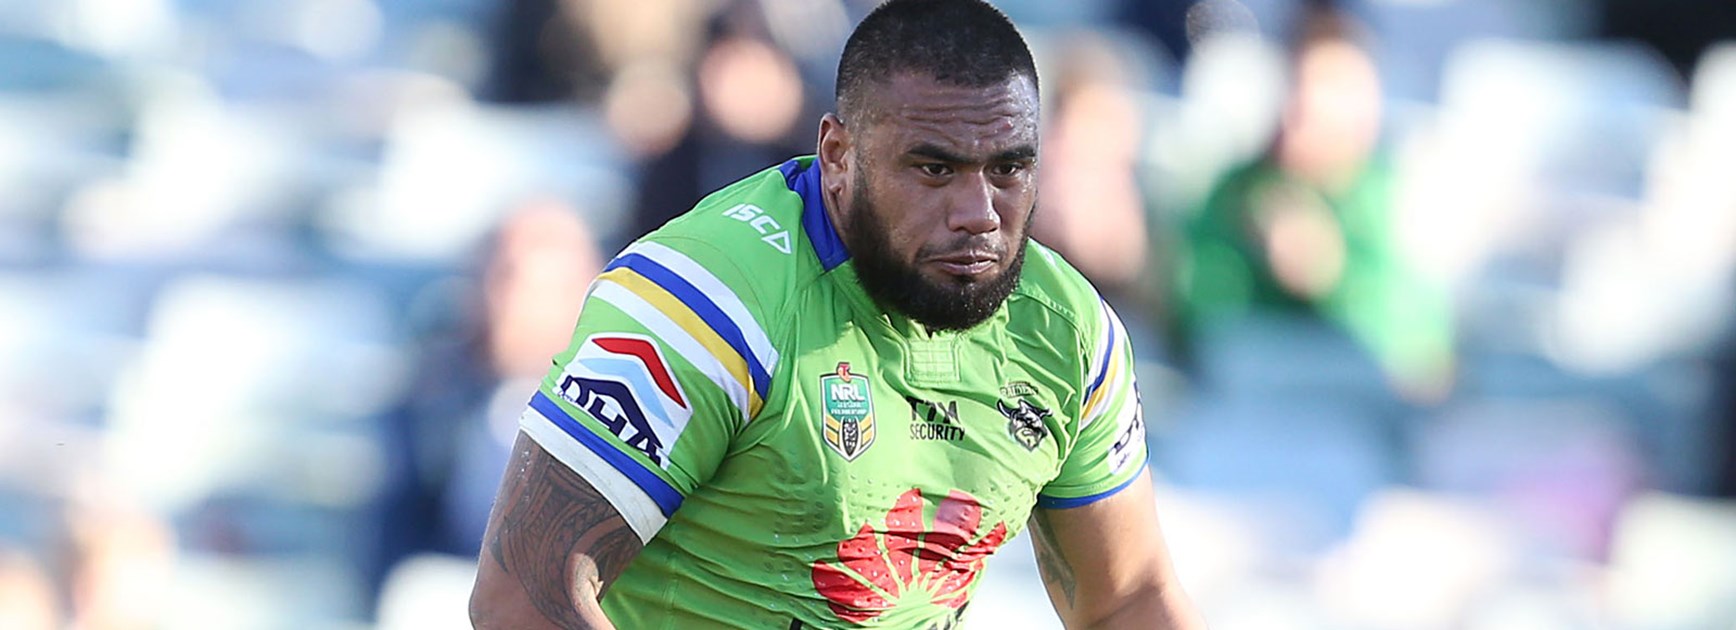 Raiders prop Junior Paulo faces his former Eels teammates for the first time in Round 24.